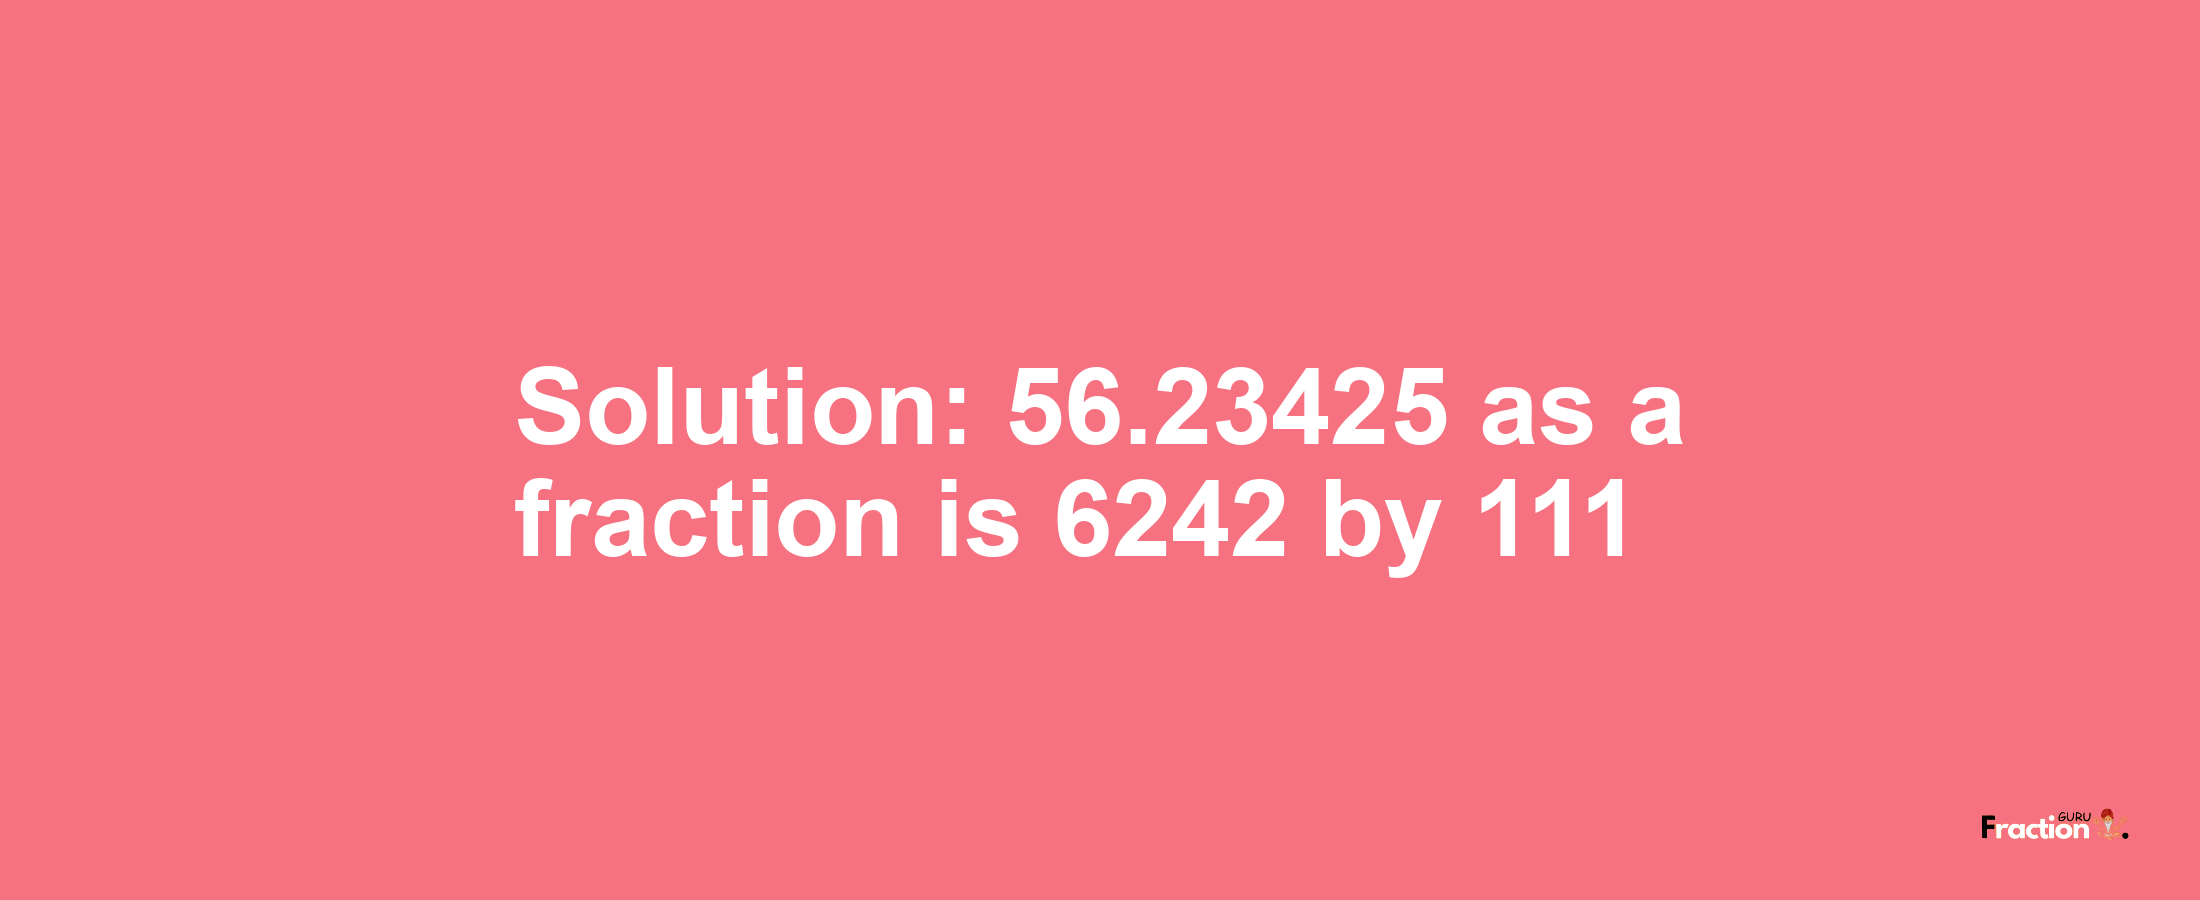 Solution:56.23425 as a fraction is 6242/111